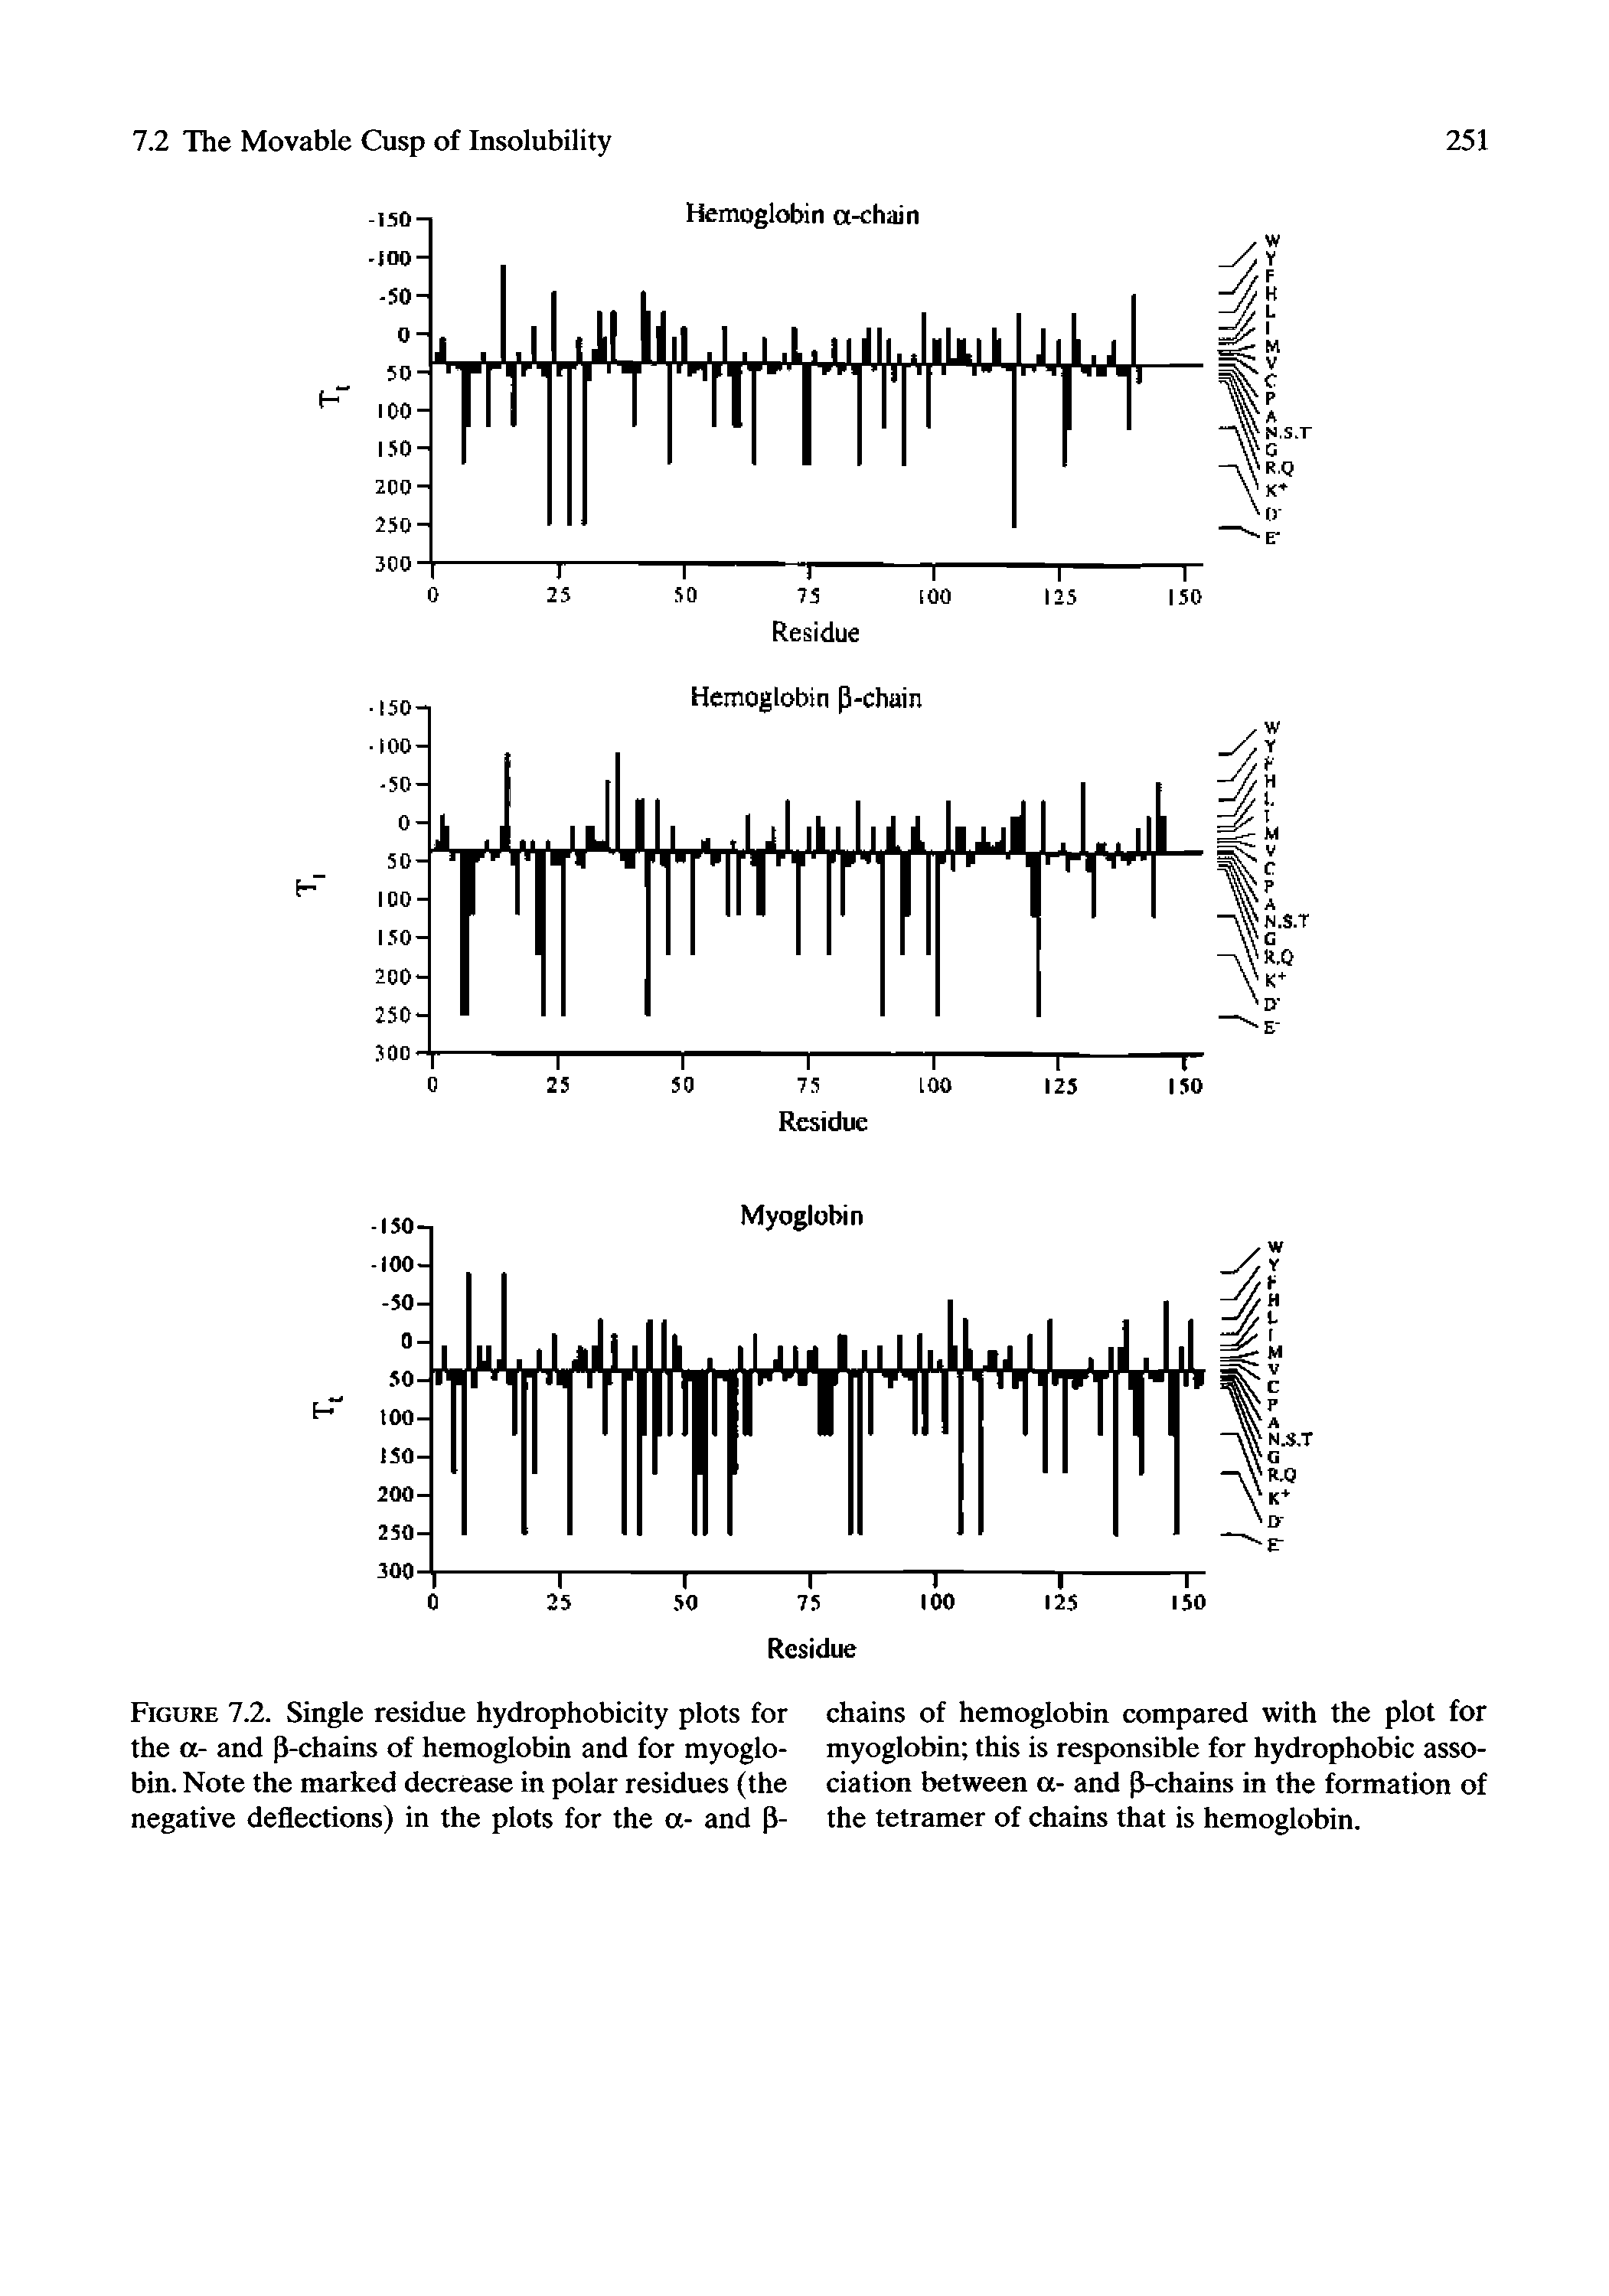 Figure 7.2. Single residue hydrophobicity plots for the a- and P-chains of hemoglobin and for myoglobin. Note the marked decrease in polar residues (the negative deflections) in the plots for the a- and p-...